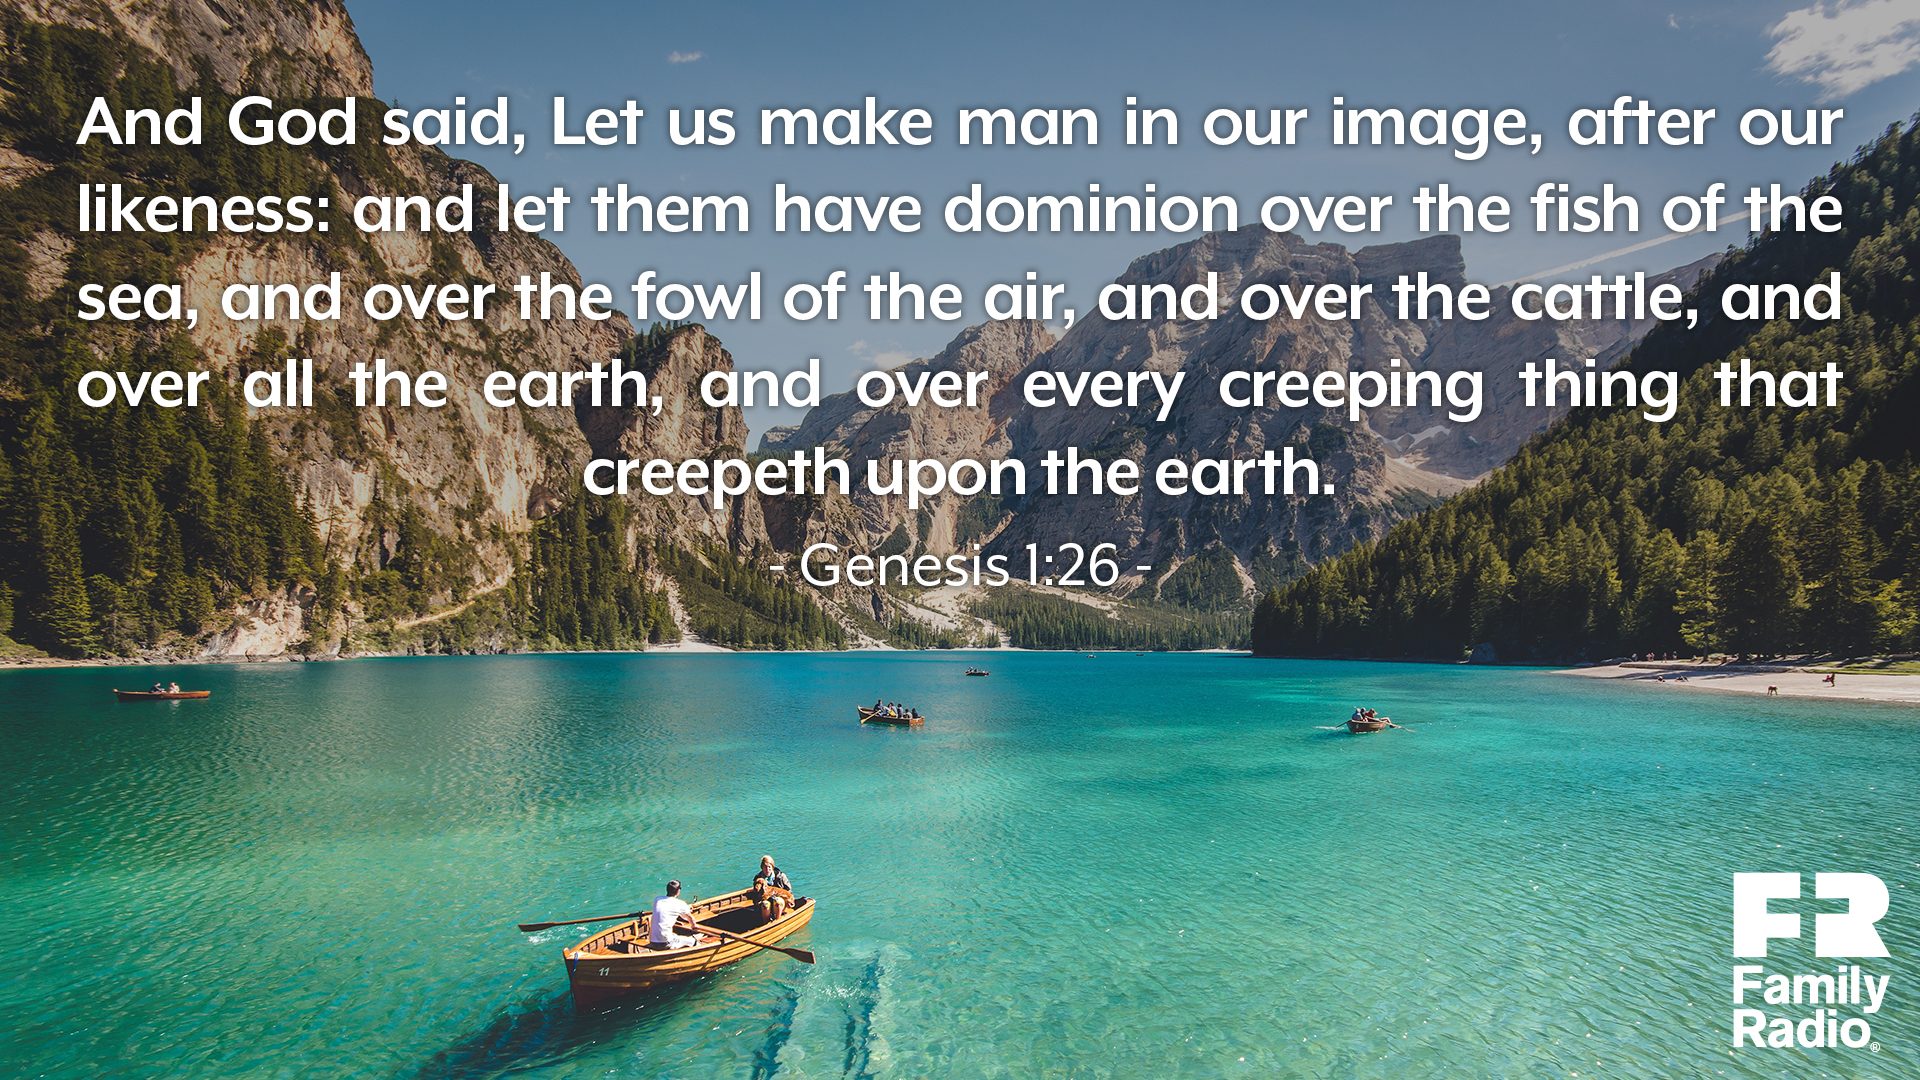 "And God said, Let us make man in our image, after our likeness: and let them have dominion over the fish of the sea, and over the fowl of the air, and over the cattle, and over all the earth, and over every creeping thing that creepeth upon the earth." 
